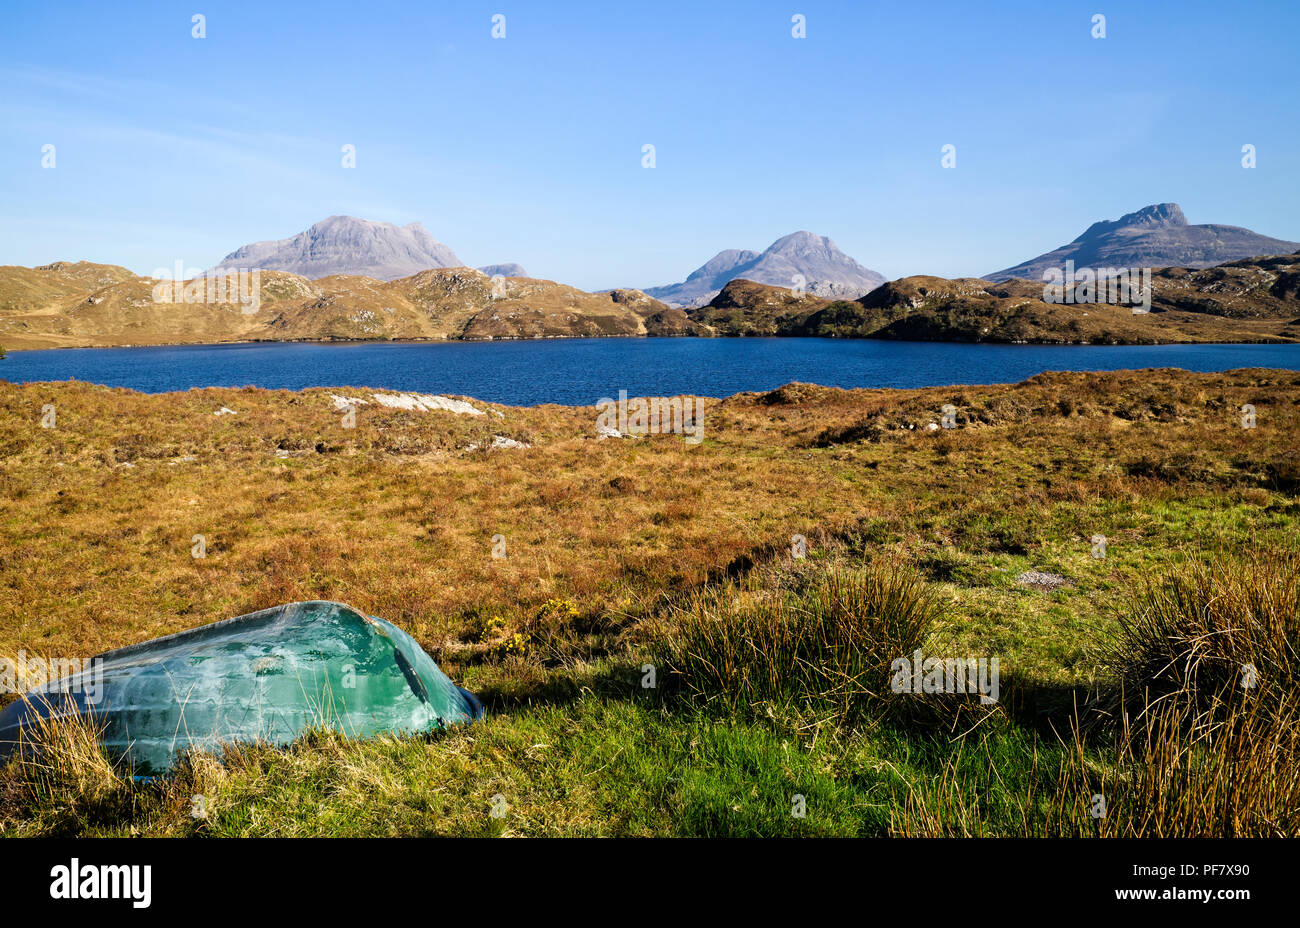 View across Loch Buine Moire to Cul Mor, Cul Beag and Stac Pollaidh, Inverpolly National Nature Reserve, Sutherland, Scottish Highlands, Scotland UK Stock Photo